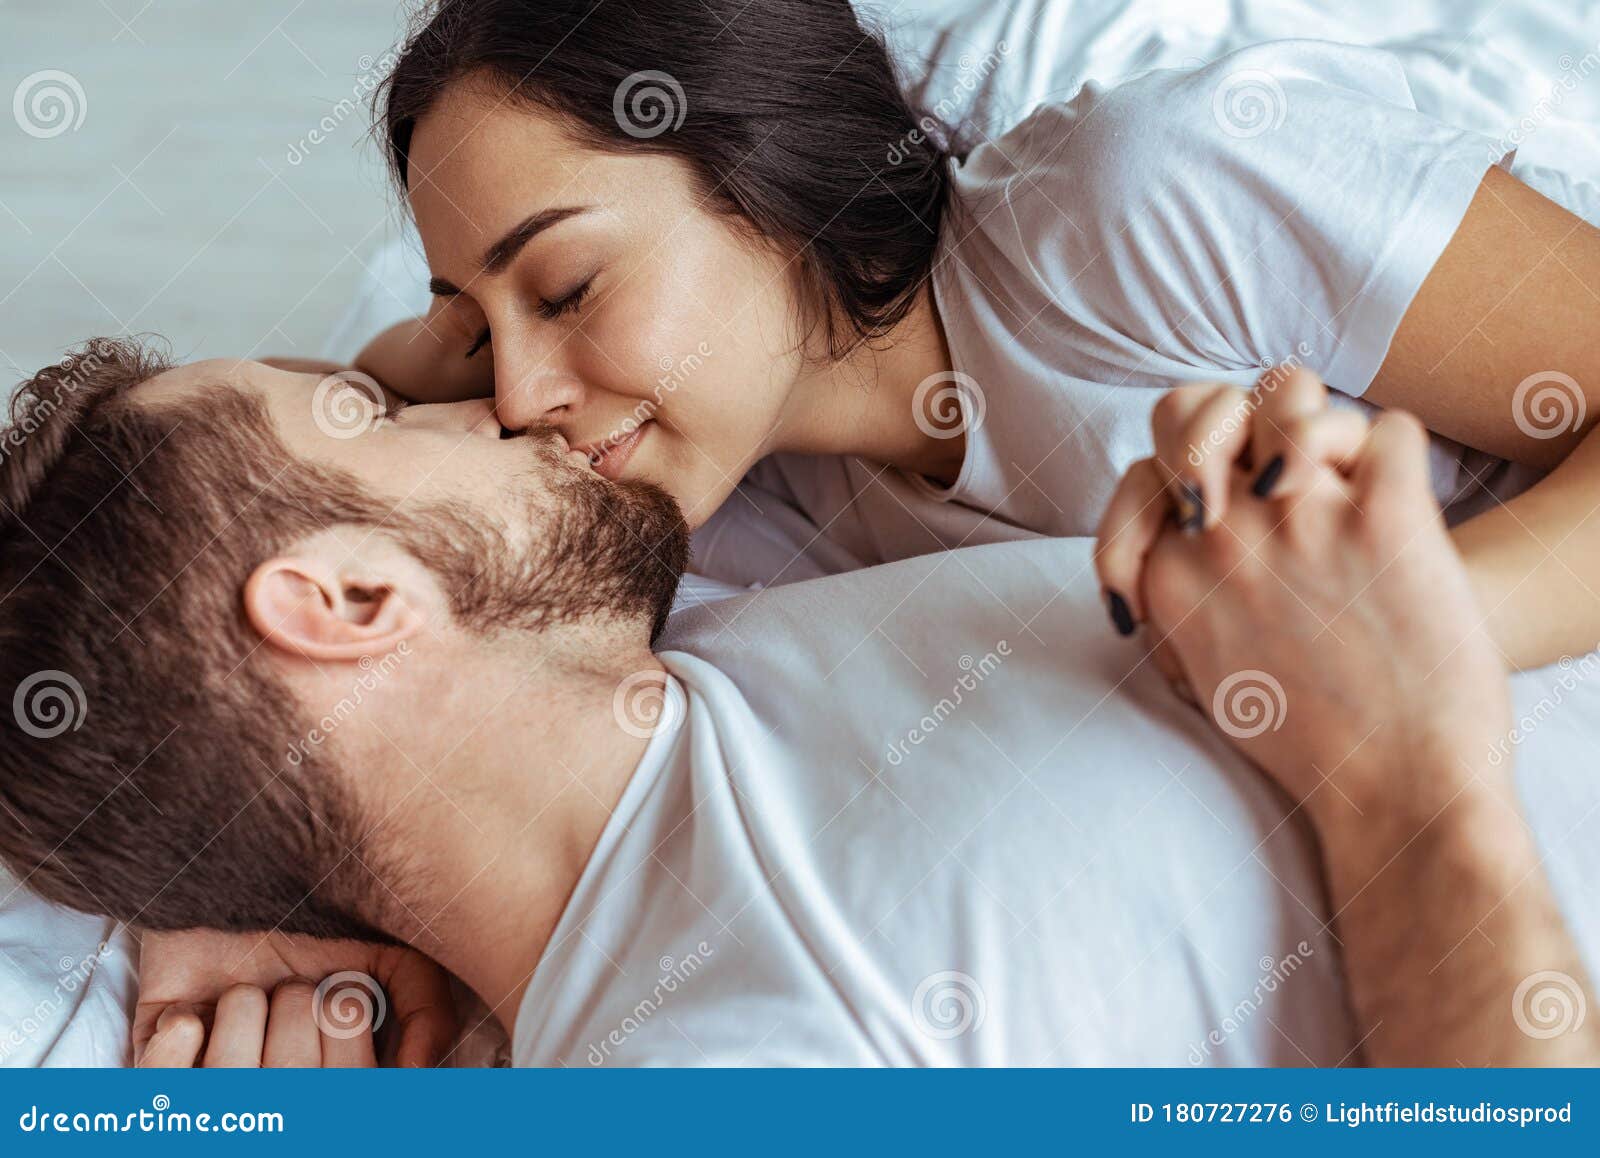 6,636 Bed Kissing Stock Photos